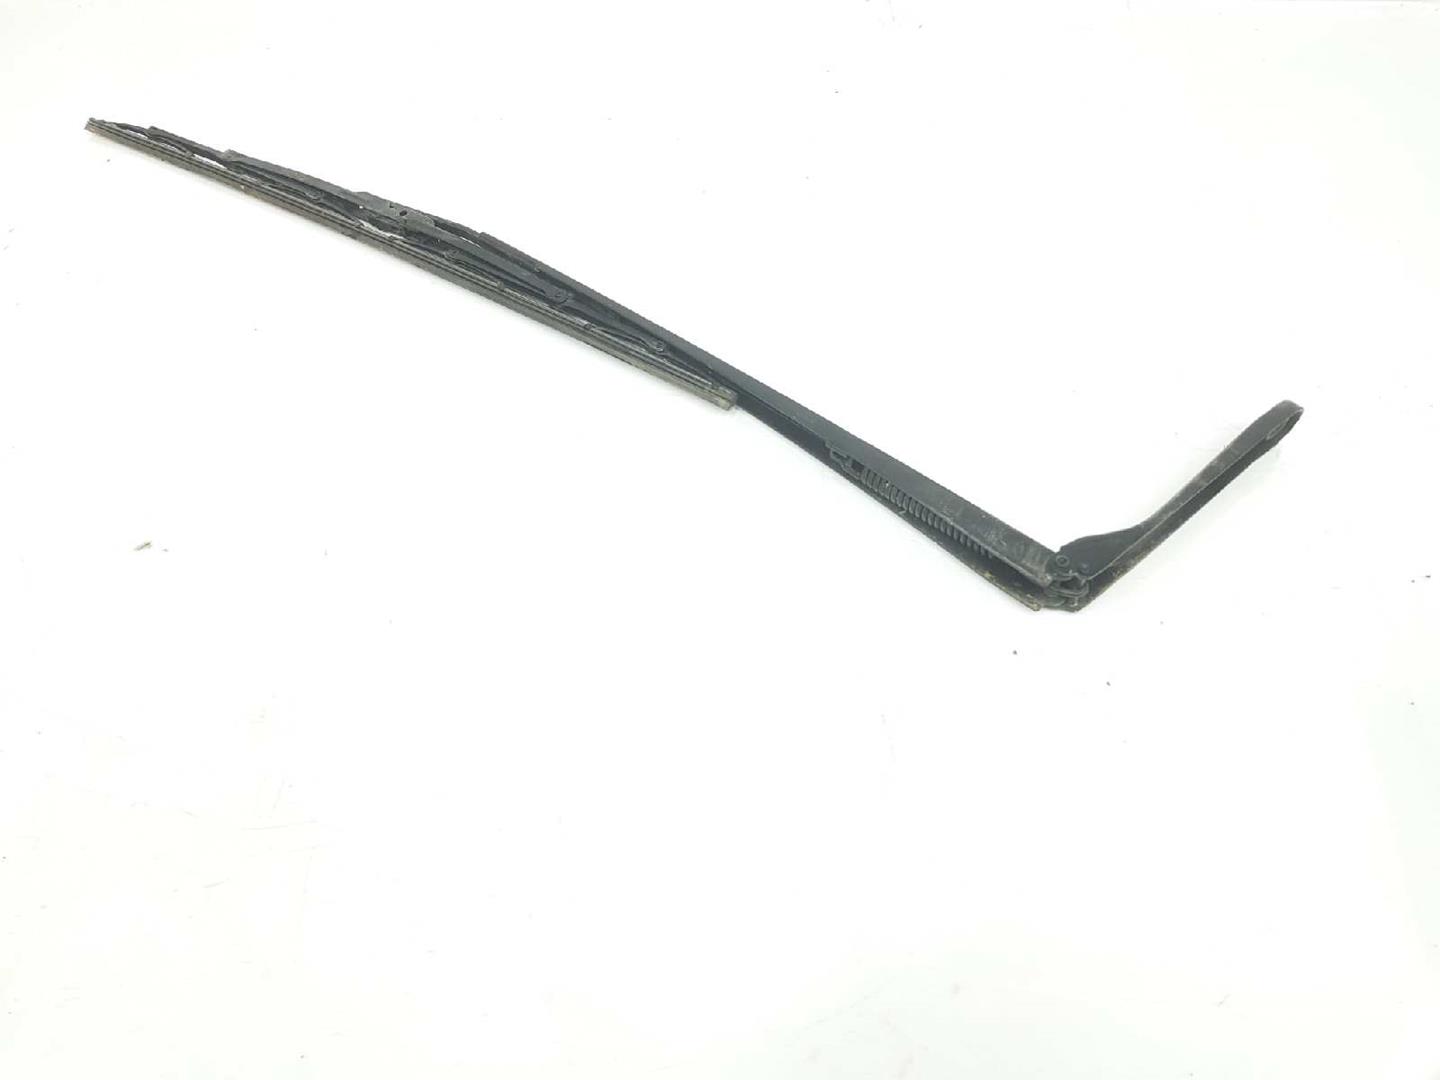 BMW X5 E53 (1999-2006) Front Wiper Arms 61619449943, 61619449943 19891375